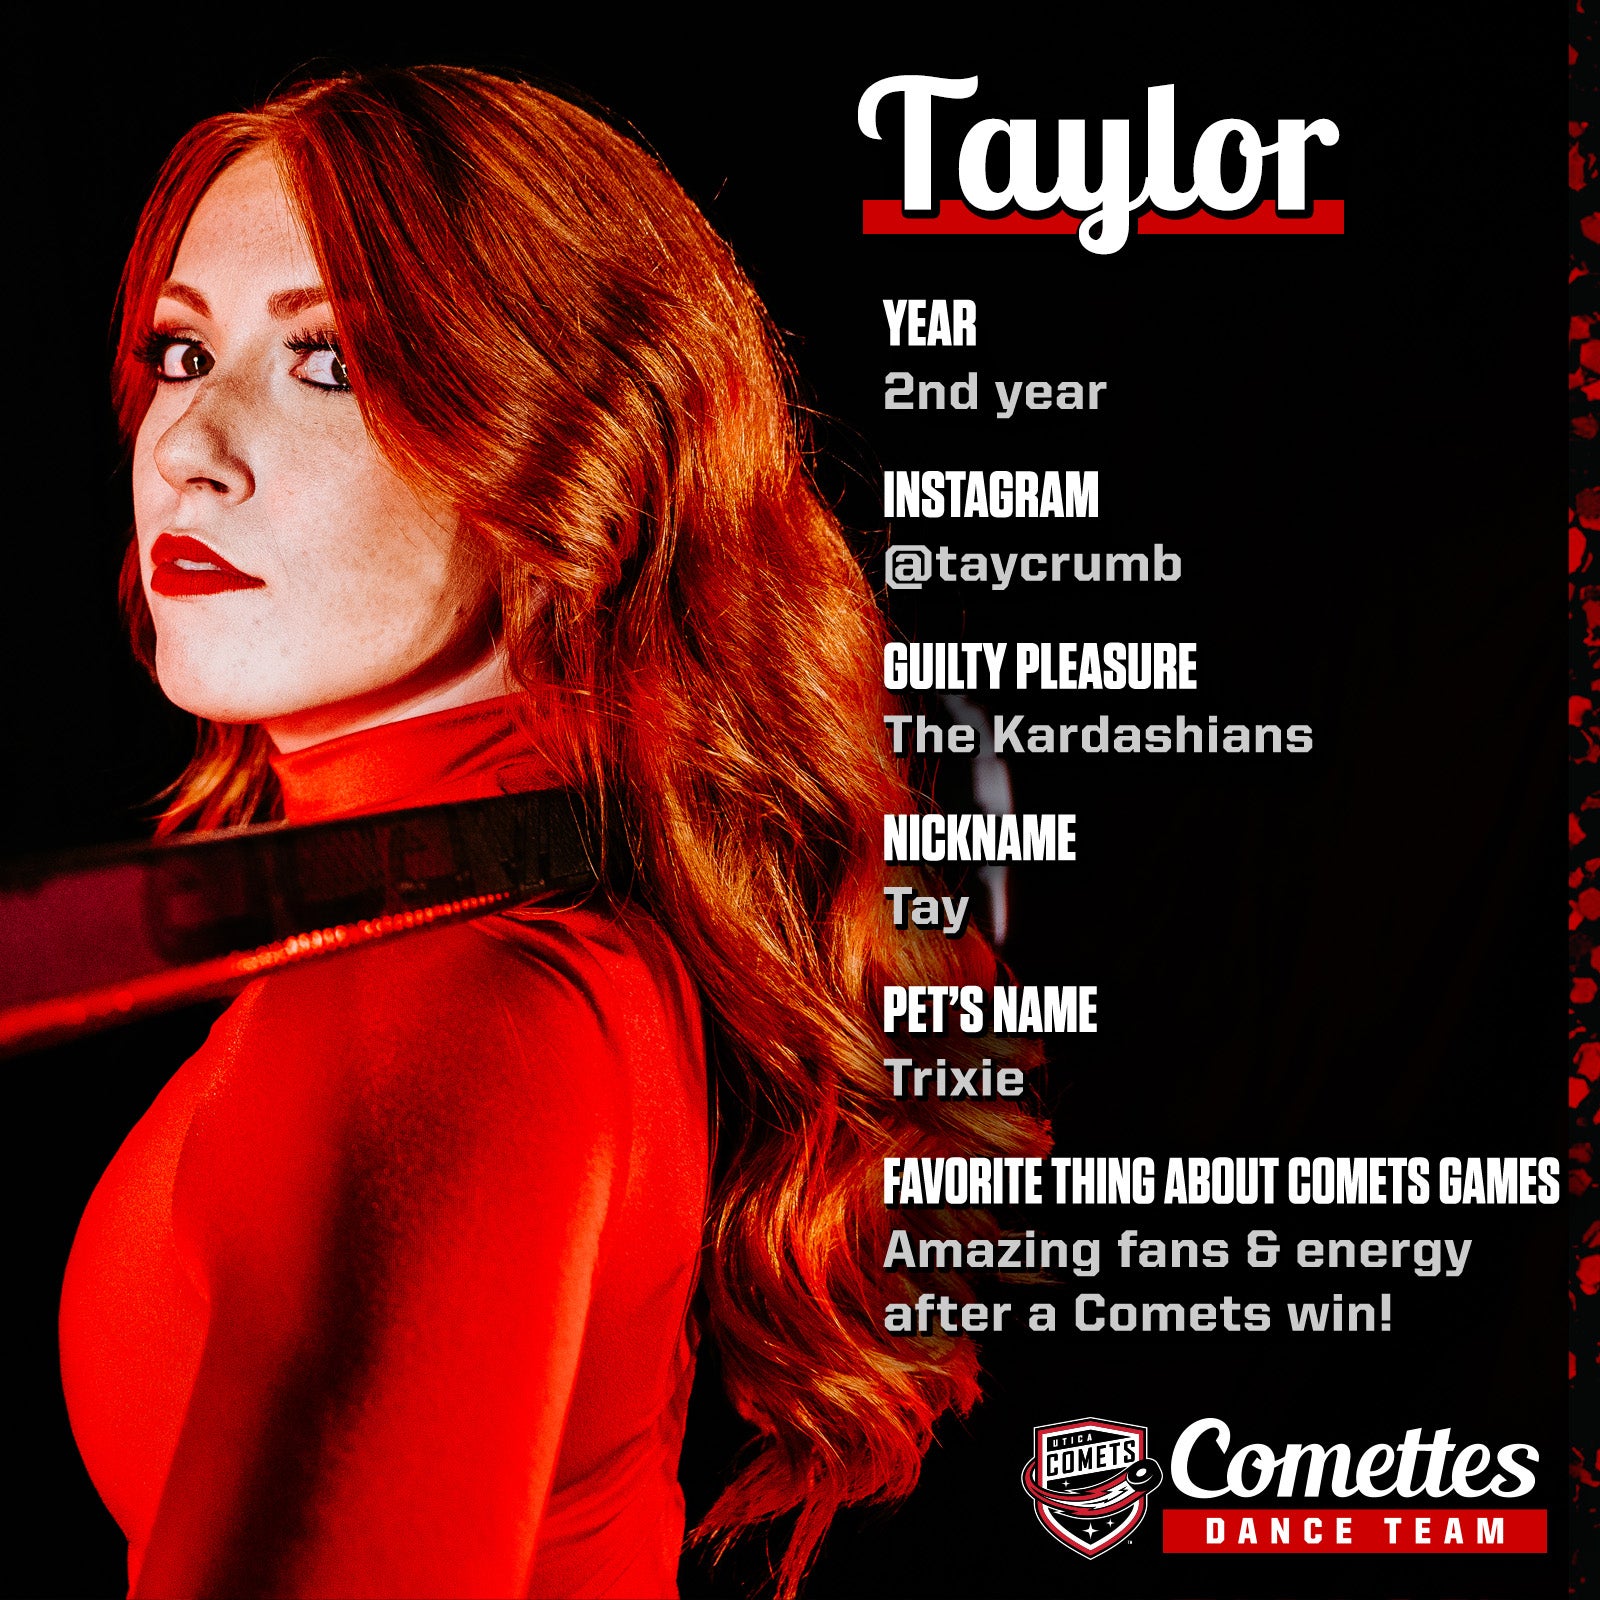 Meet The Comettes_Template_Taylor copy.jpg